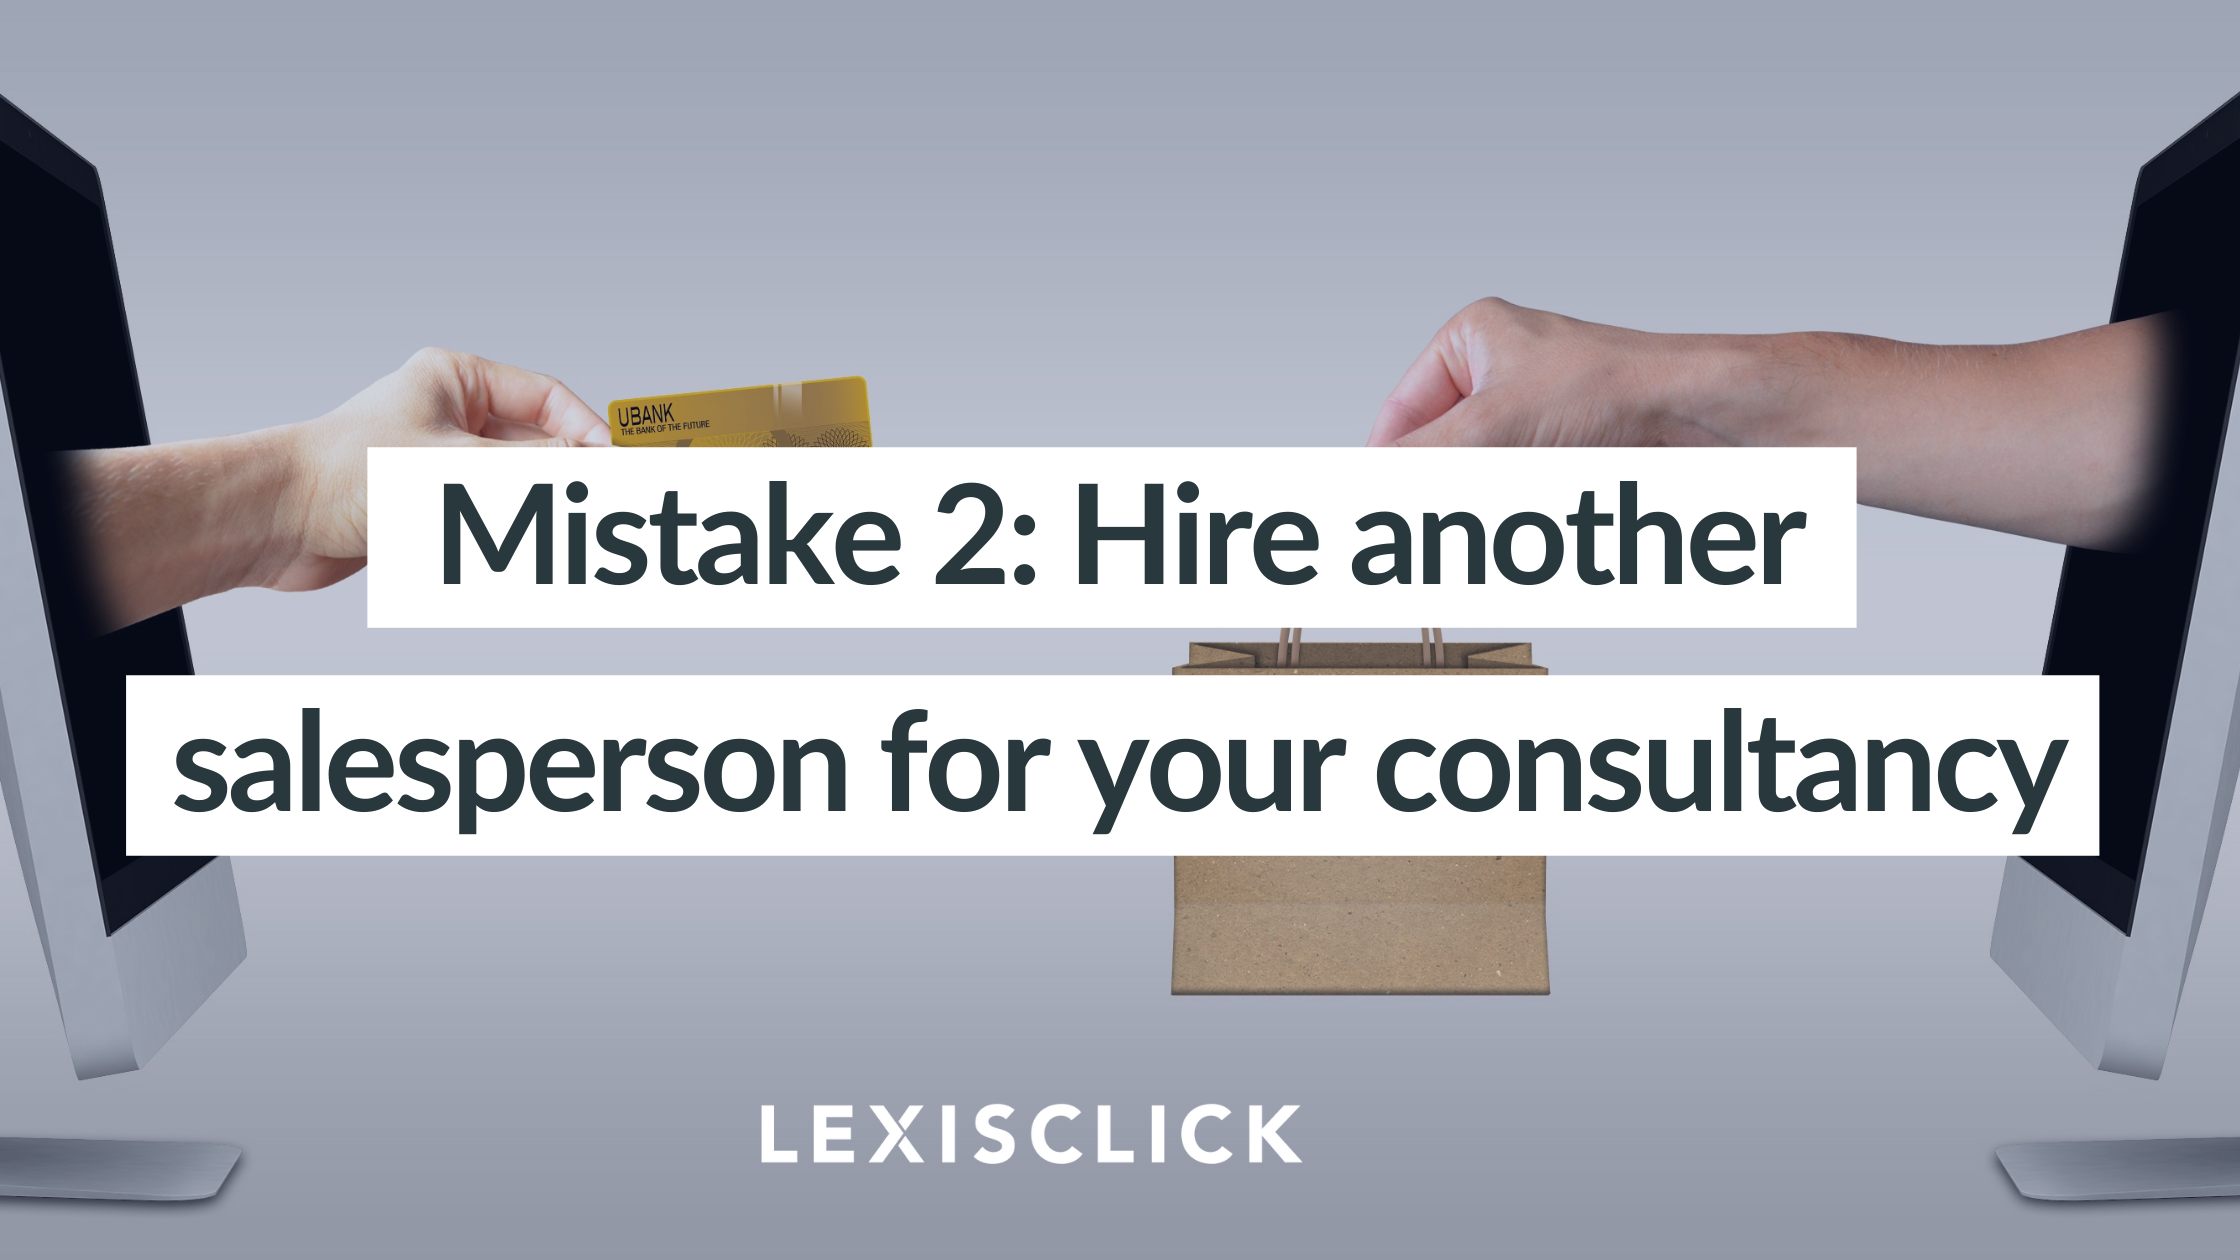 Mistake 2 Hire another salesperson for your consultancy